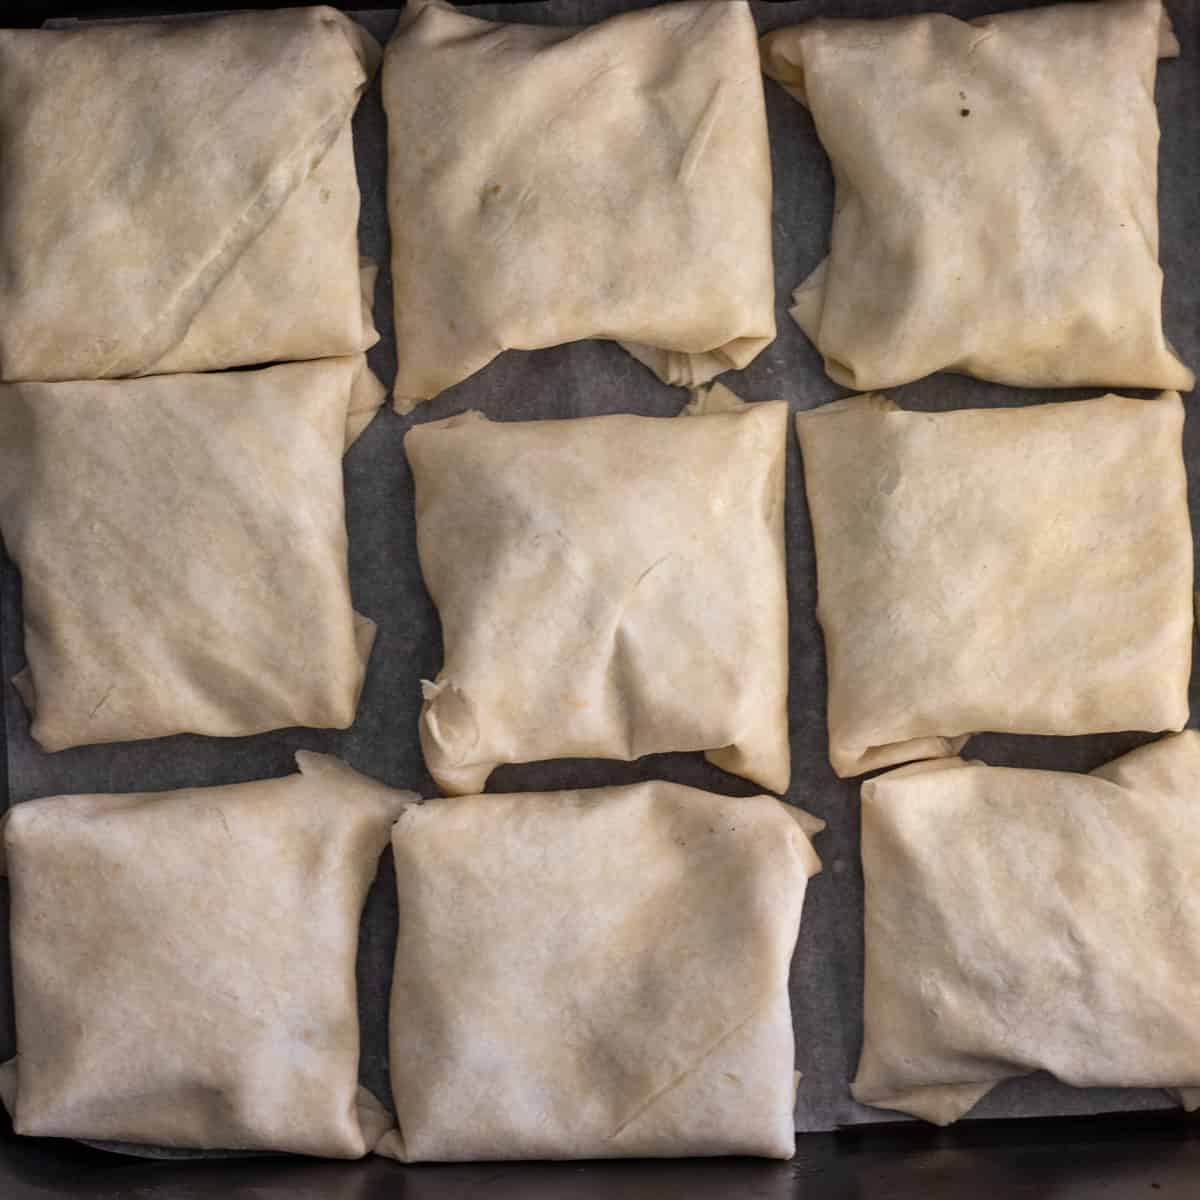 the borek parcels are placed on a baking paper lined tray